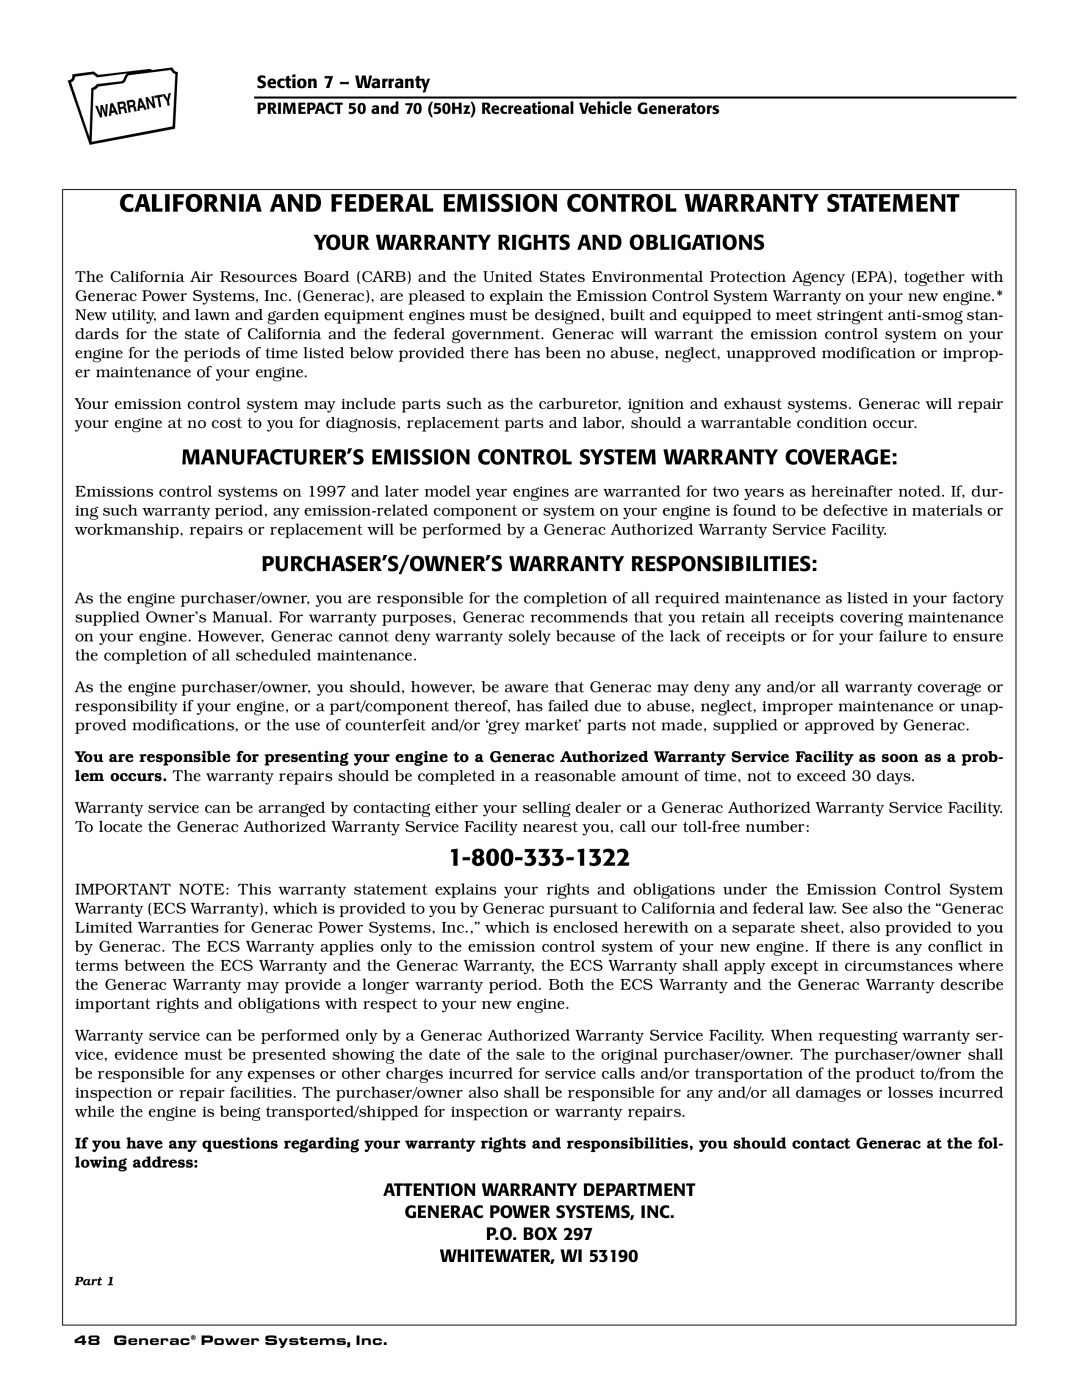 Generac 00784-2, 09290-4 California And Federal Emission Control Warranty Statement, Your Warranty Rights And Obligations 